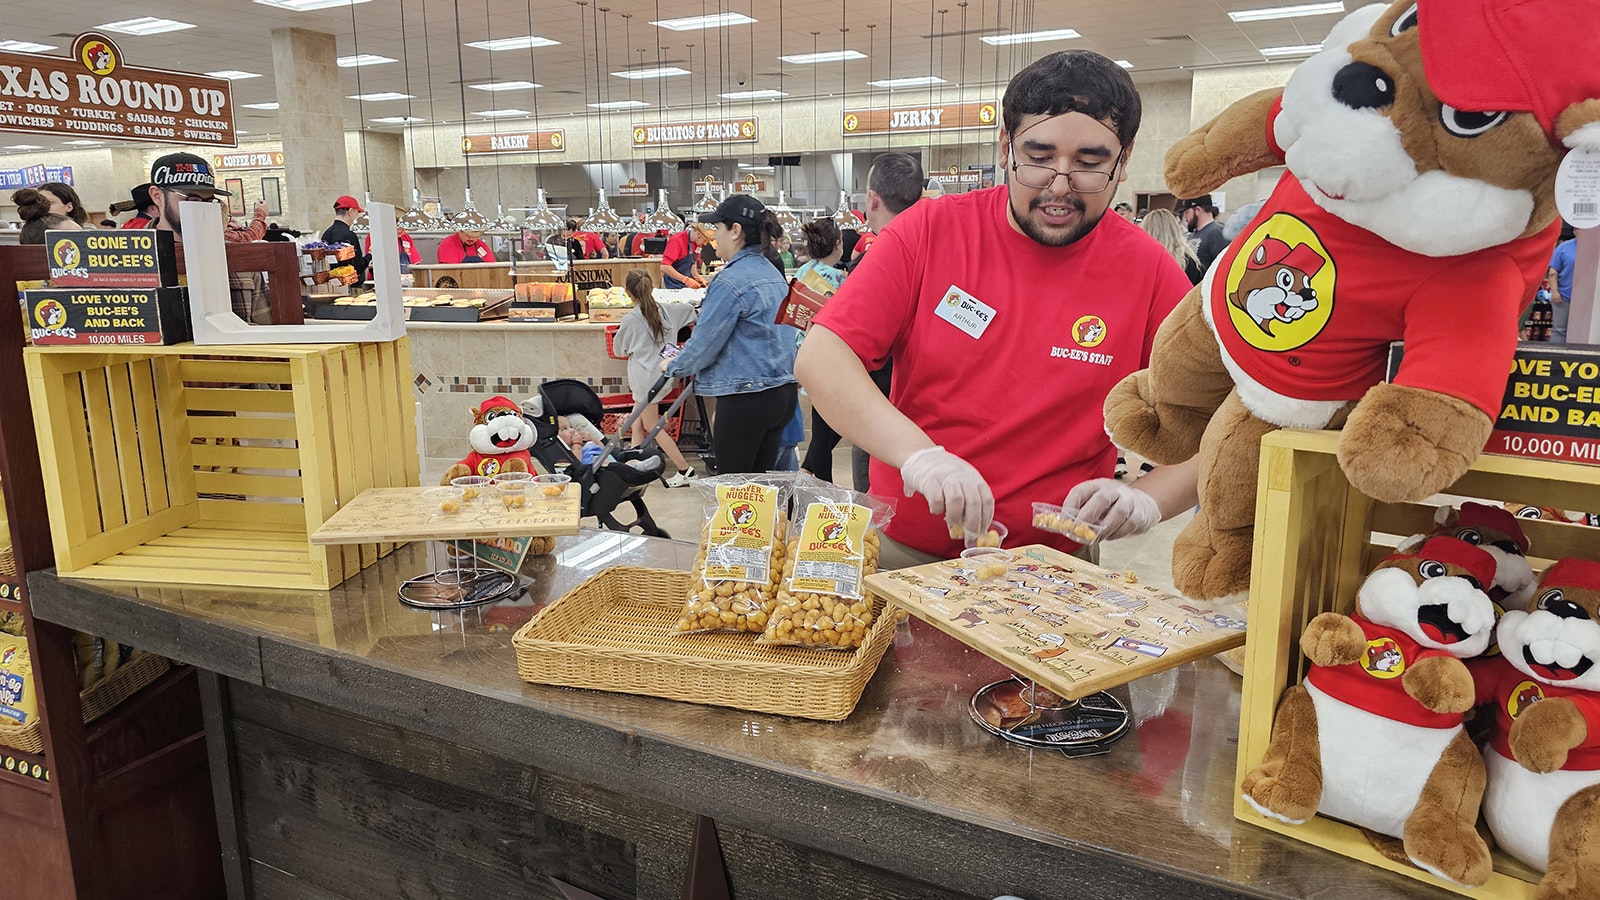 Arthur Merrival places samples of Beaver Nuggets in plastic cups for customers to try.